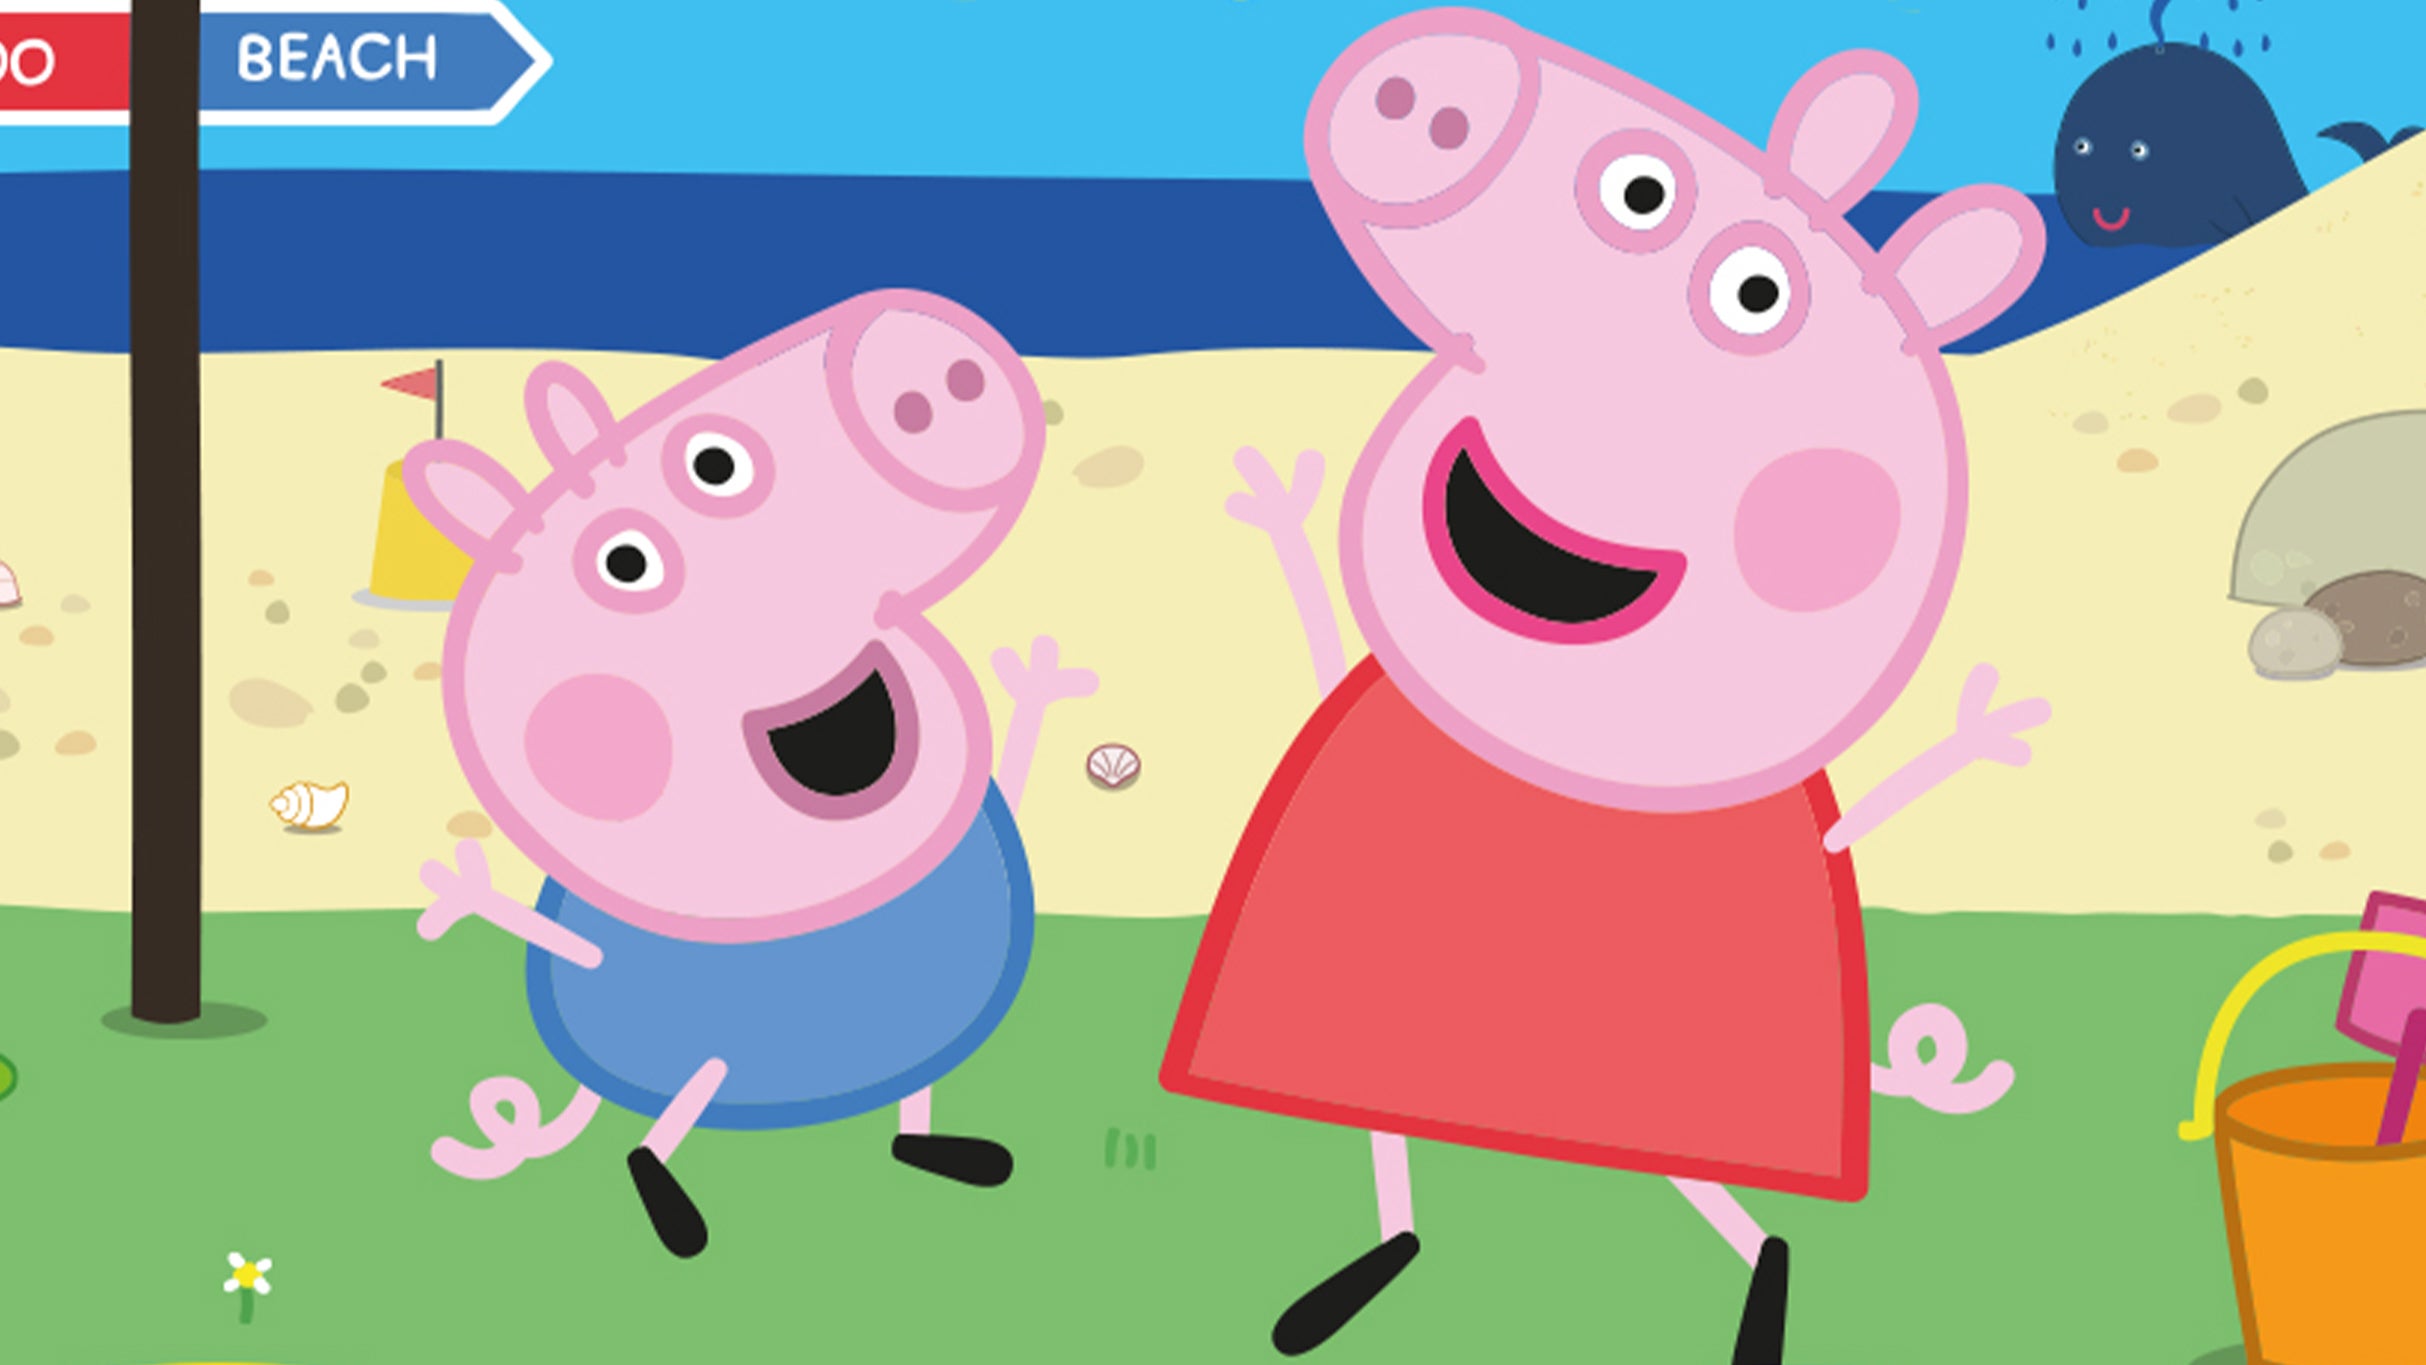 Peppa Pig's Fun Day Out in Dublin promo photo for MCD presale offer code